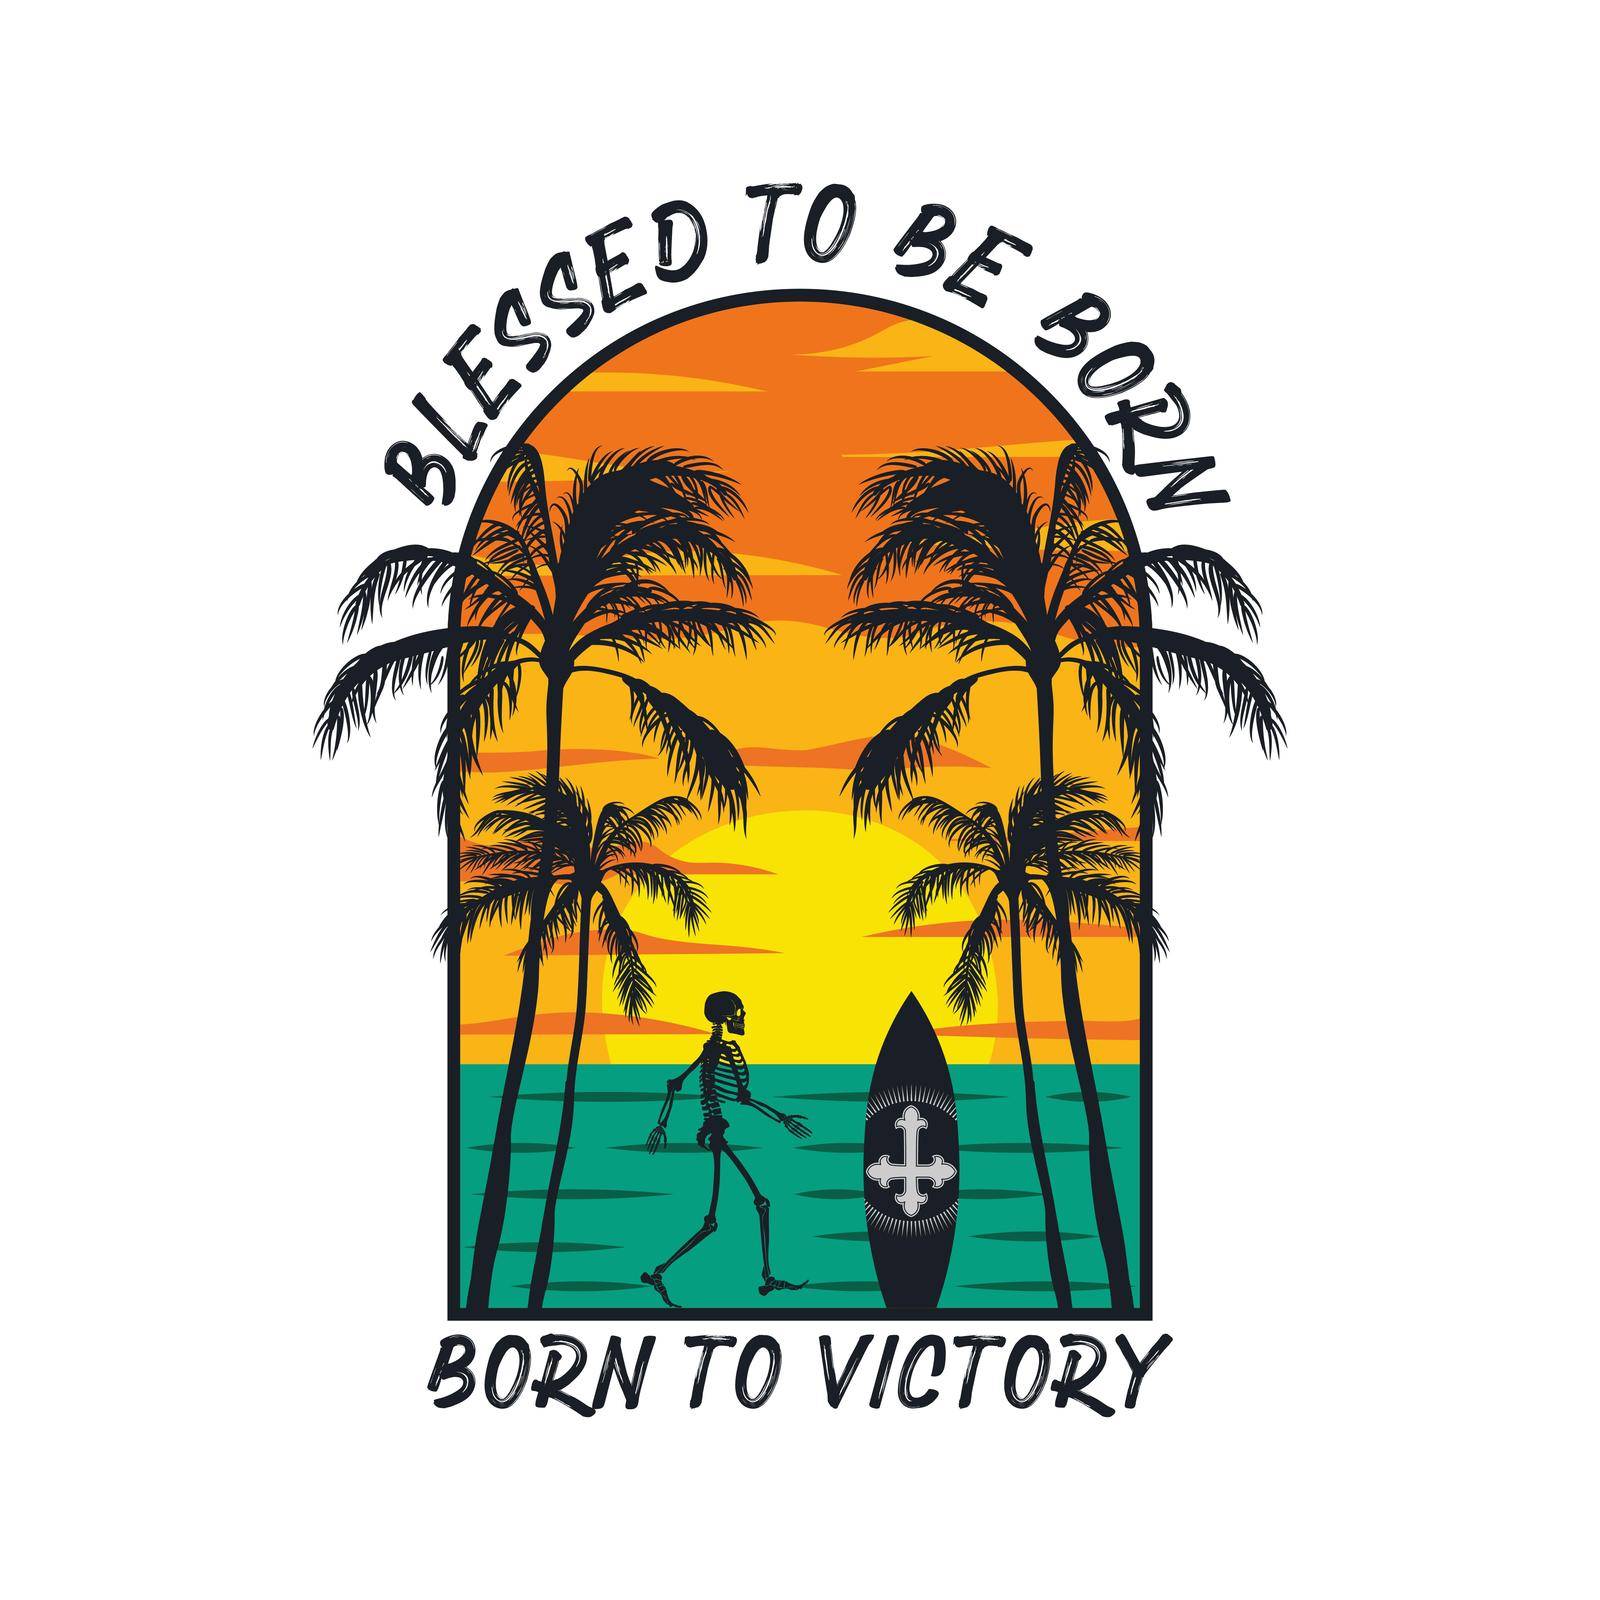 Blessed to be born, born to victory by Menyoen